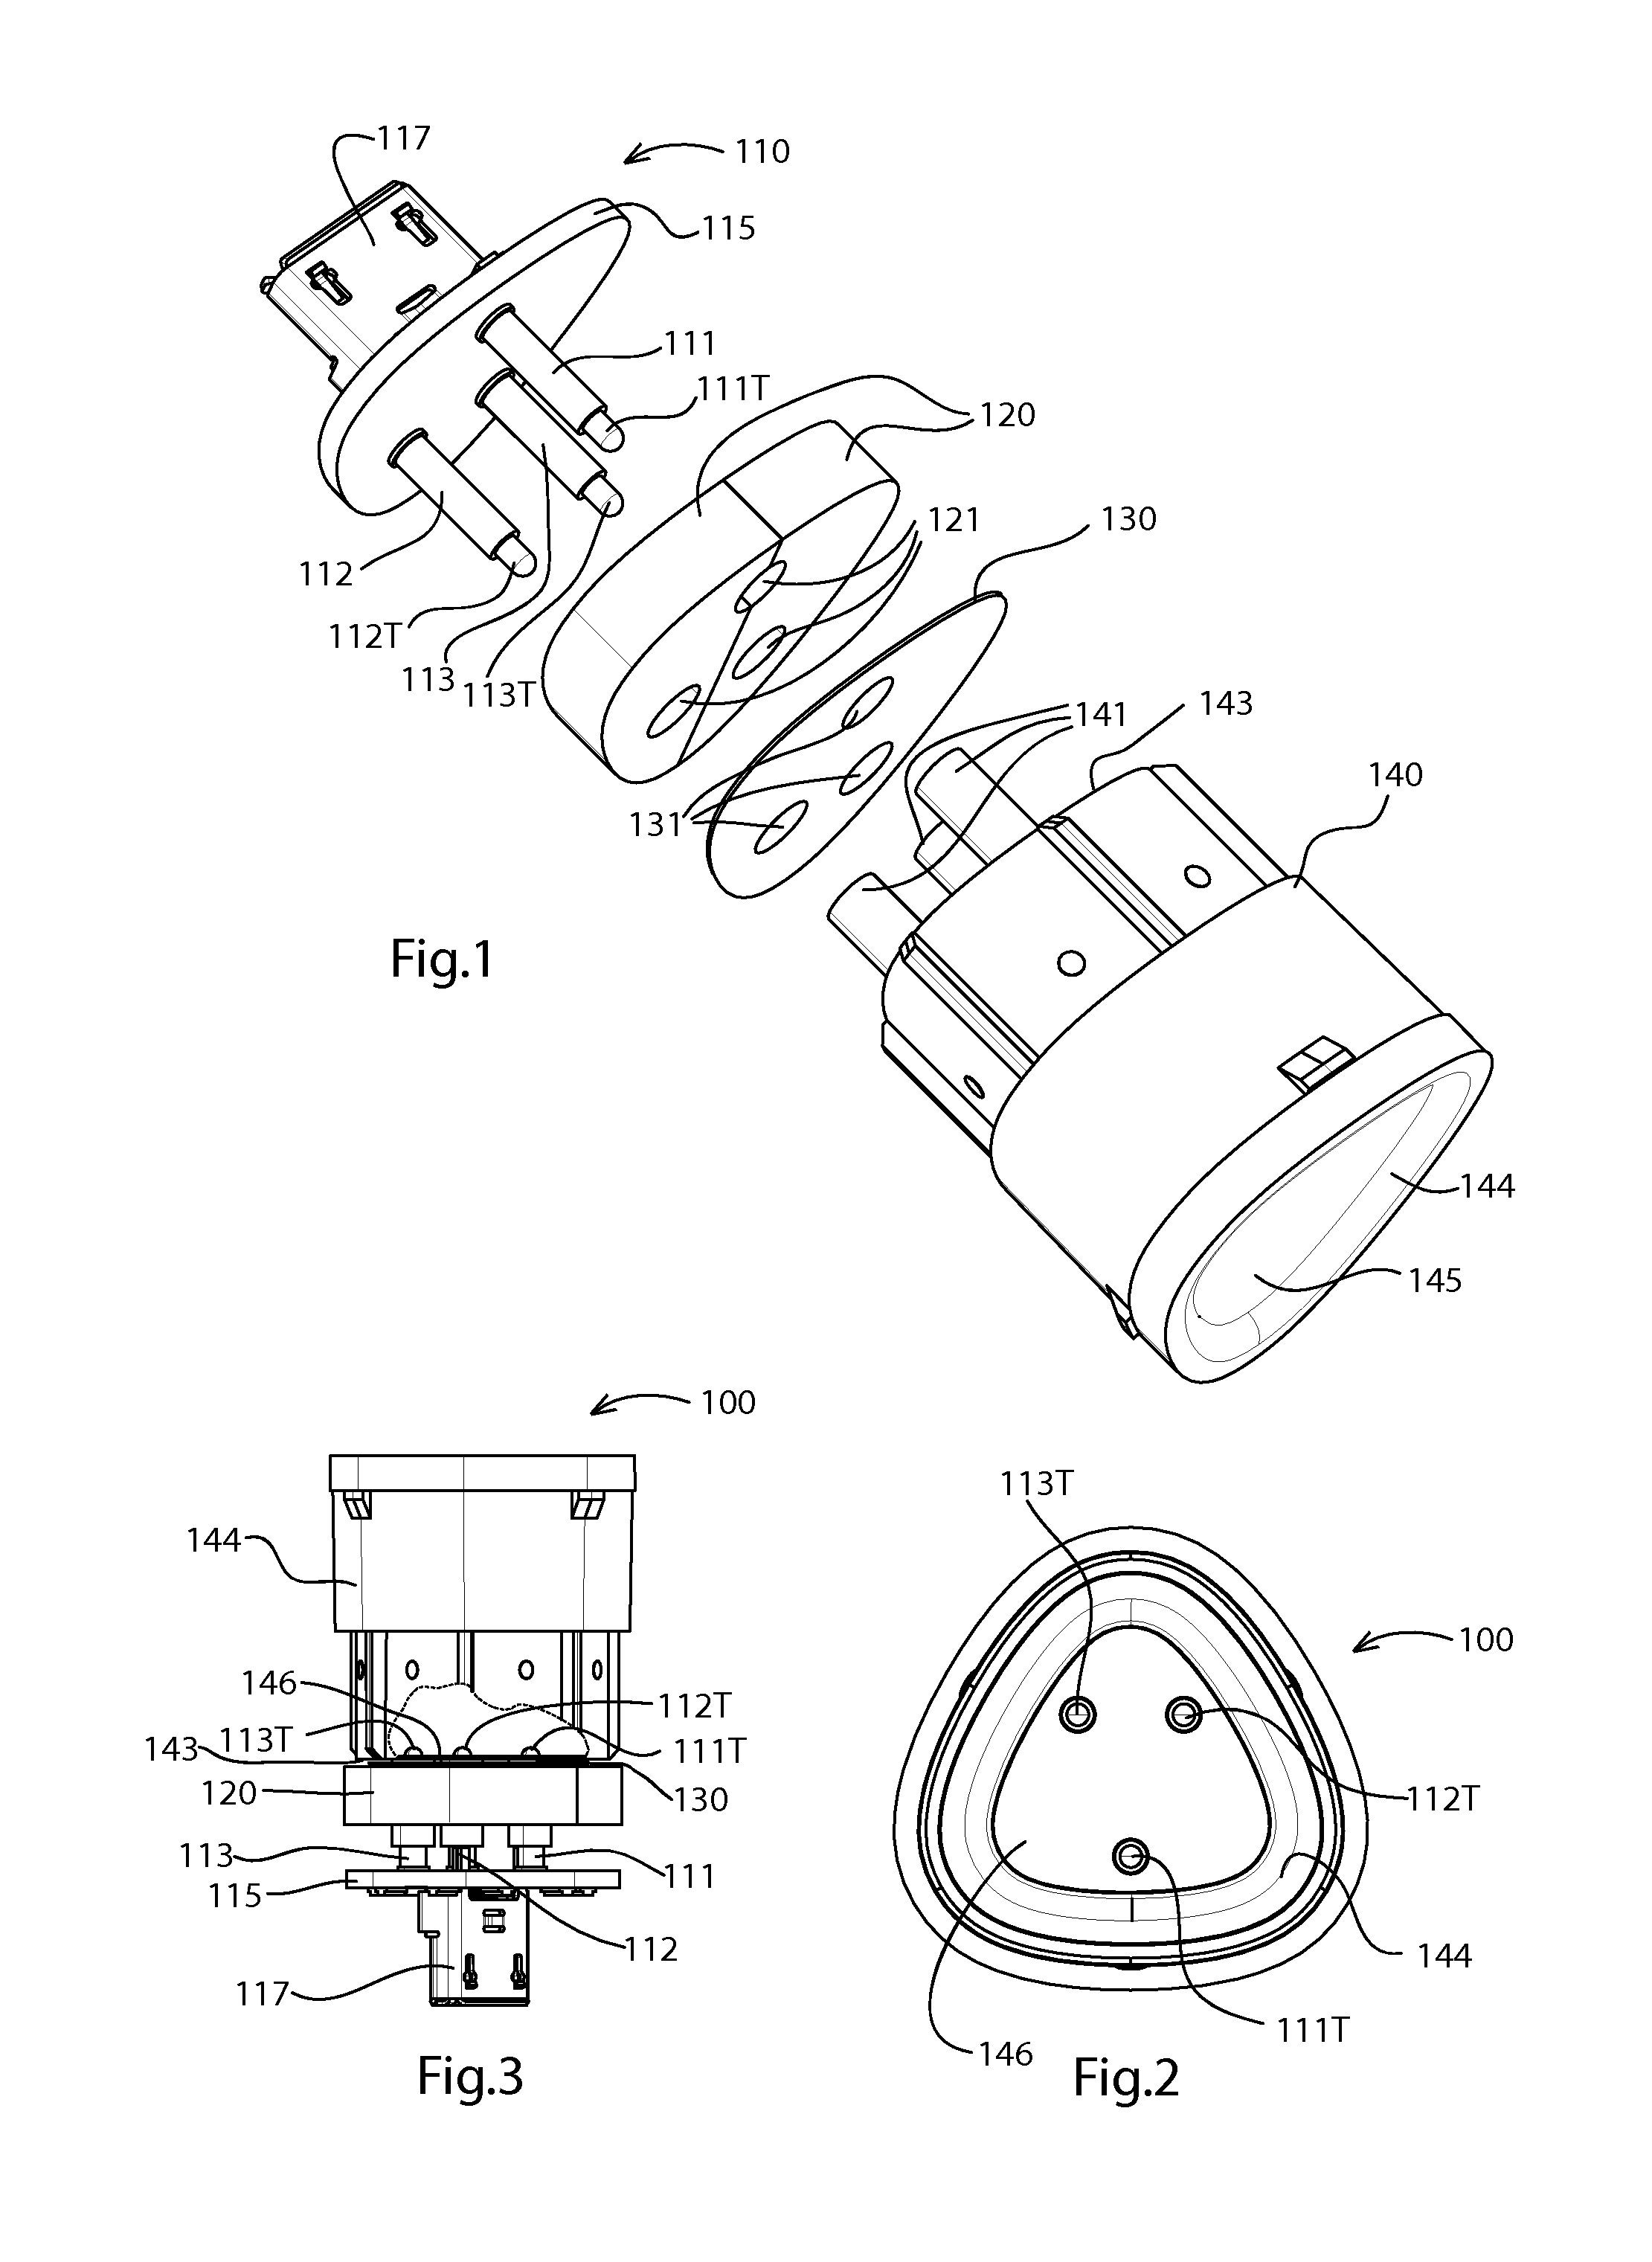 Battery charger device and method